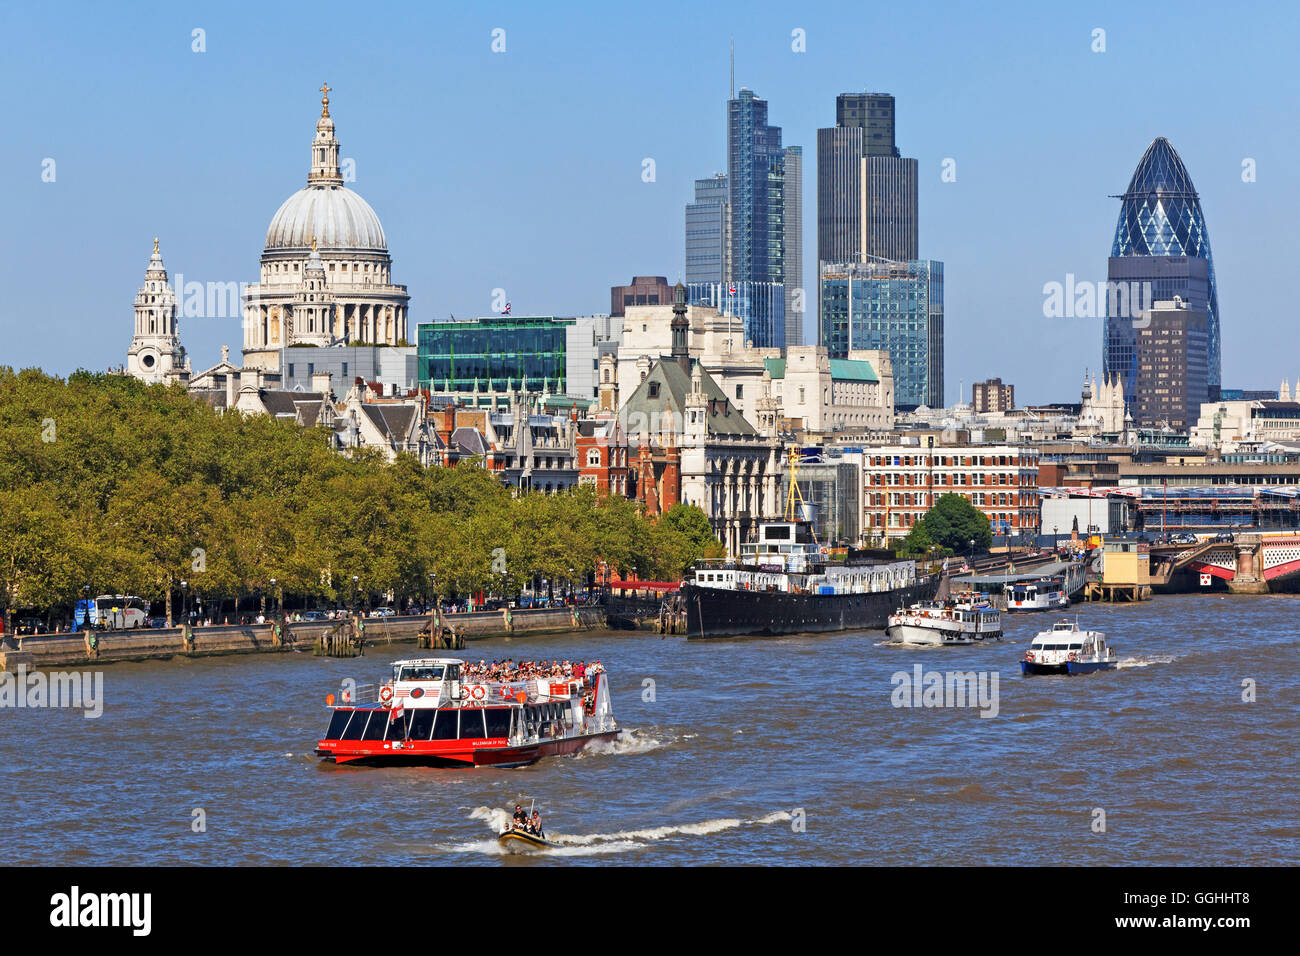 View over the Thames to St. Paul's Cathedral and the office highrisers of the City, London, England, United Kingdom Stock Photo